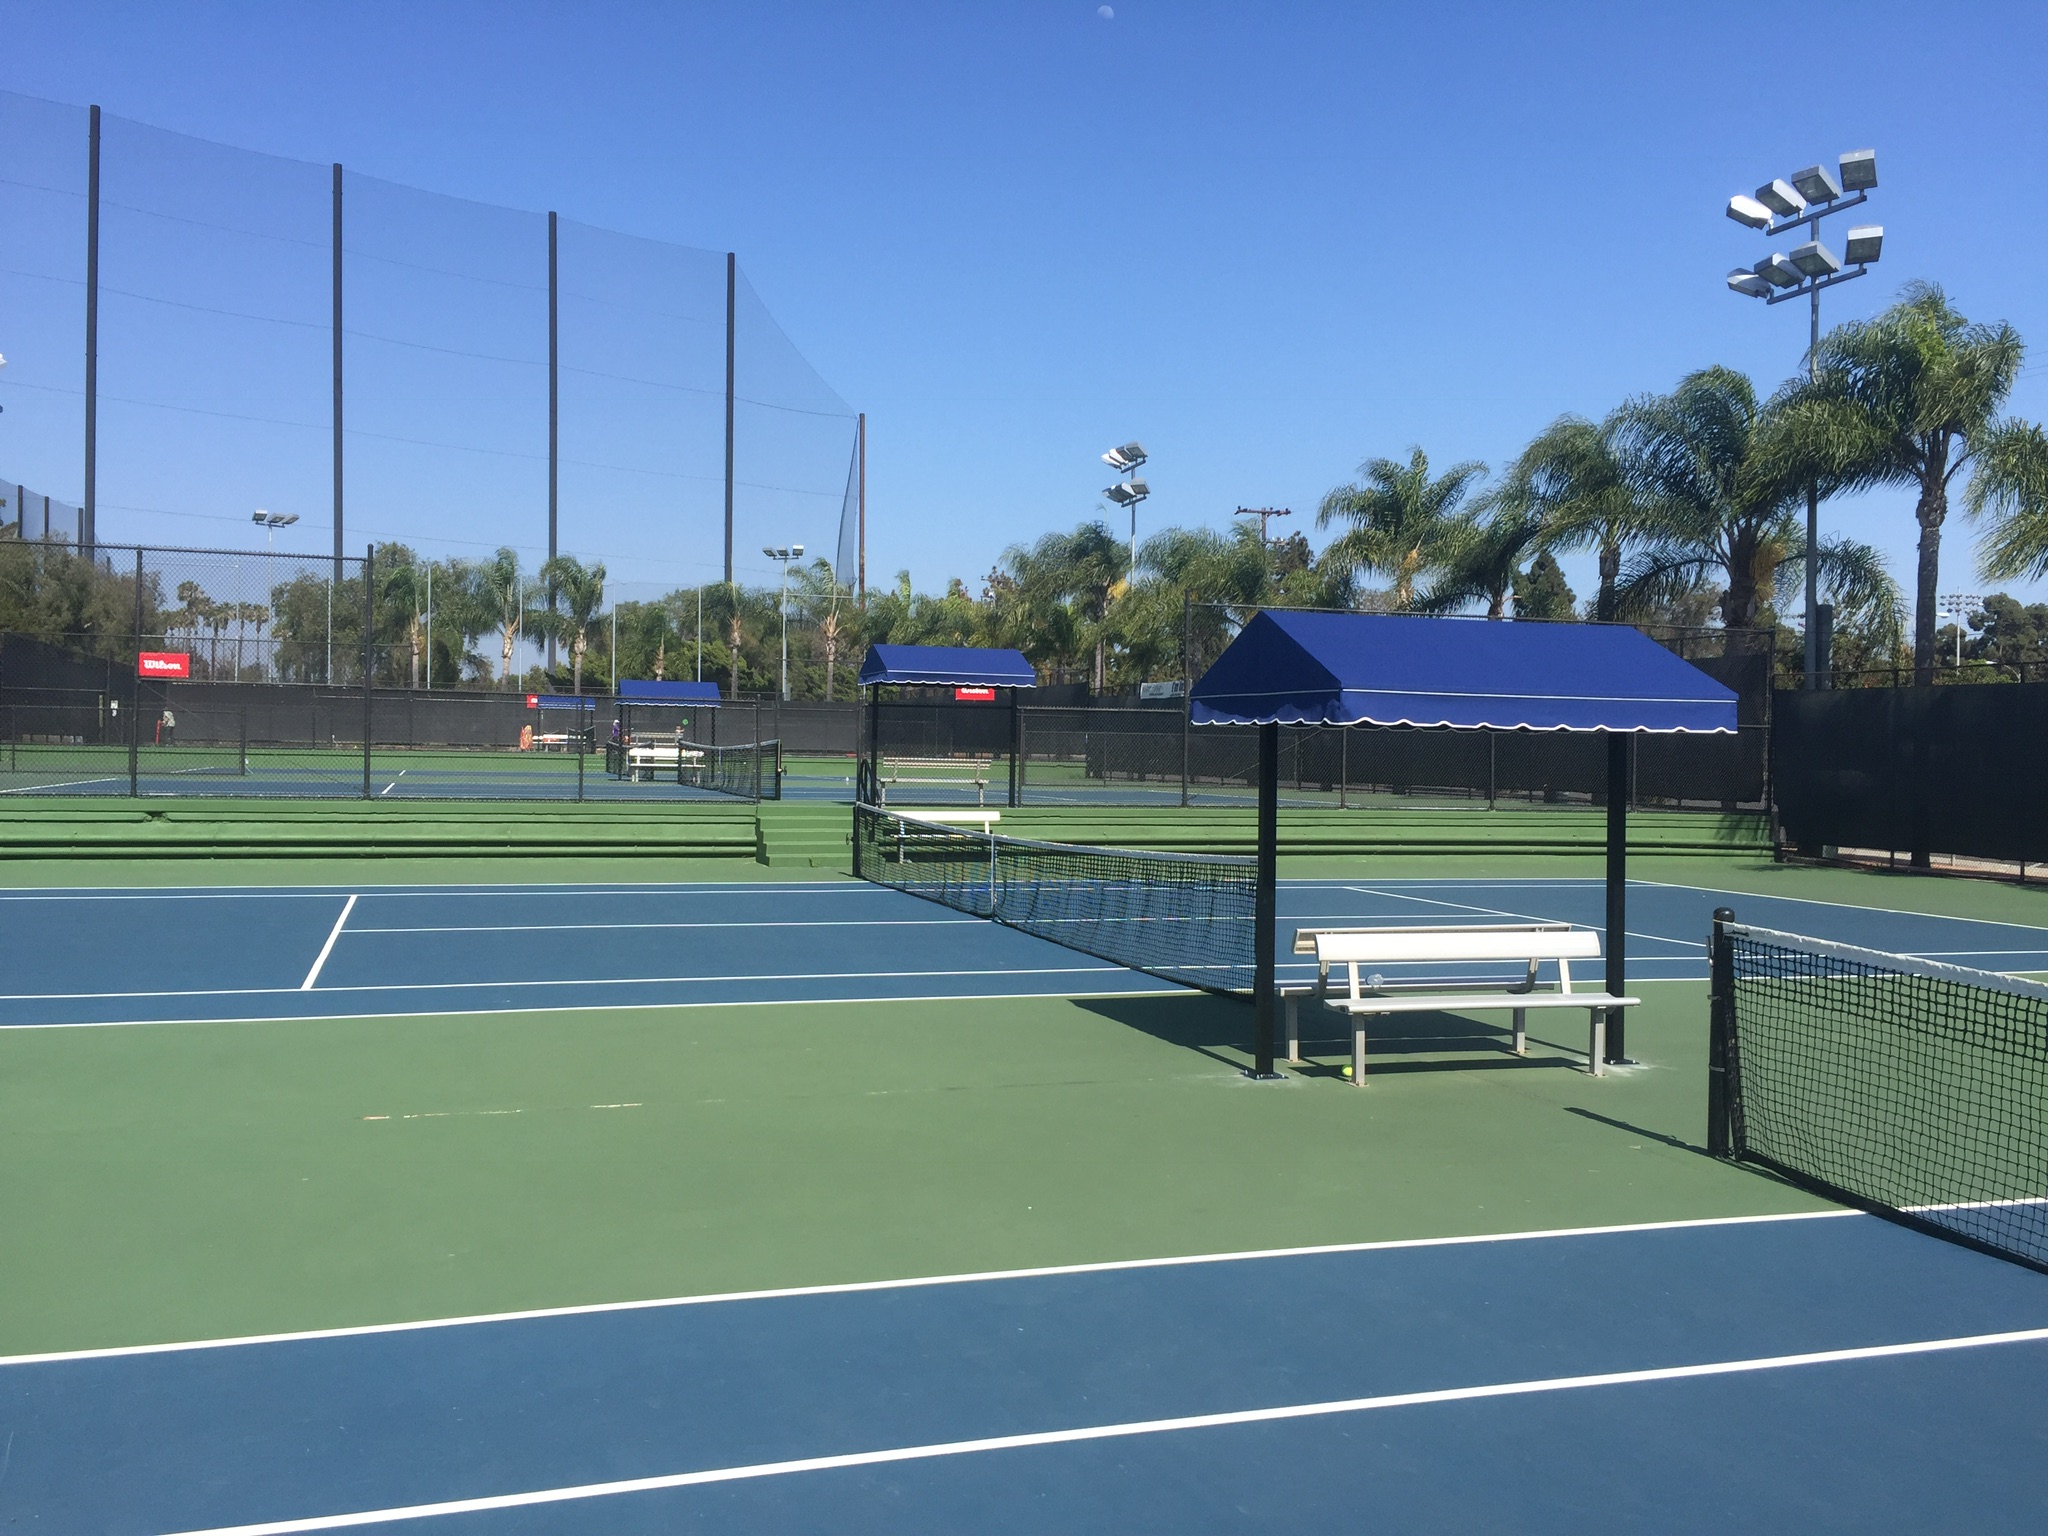 SCHEDULE: Moore League Tennis 2021 – The562.org